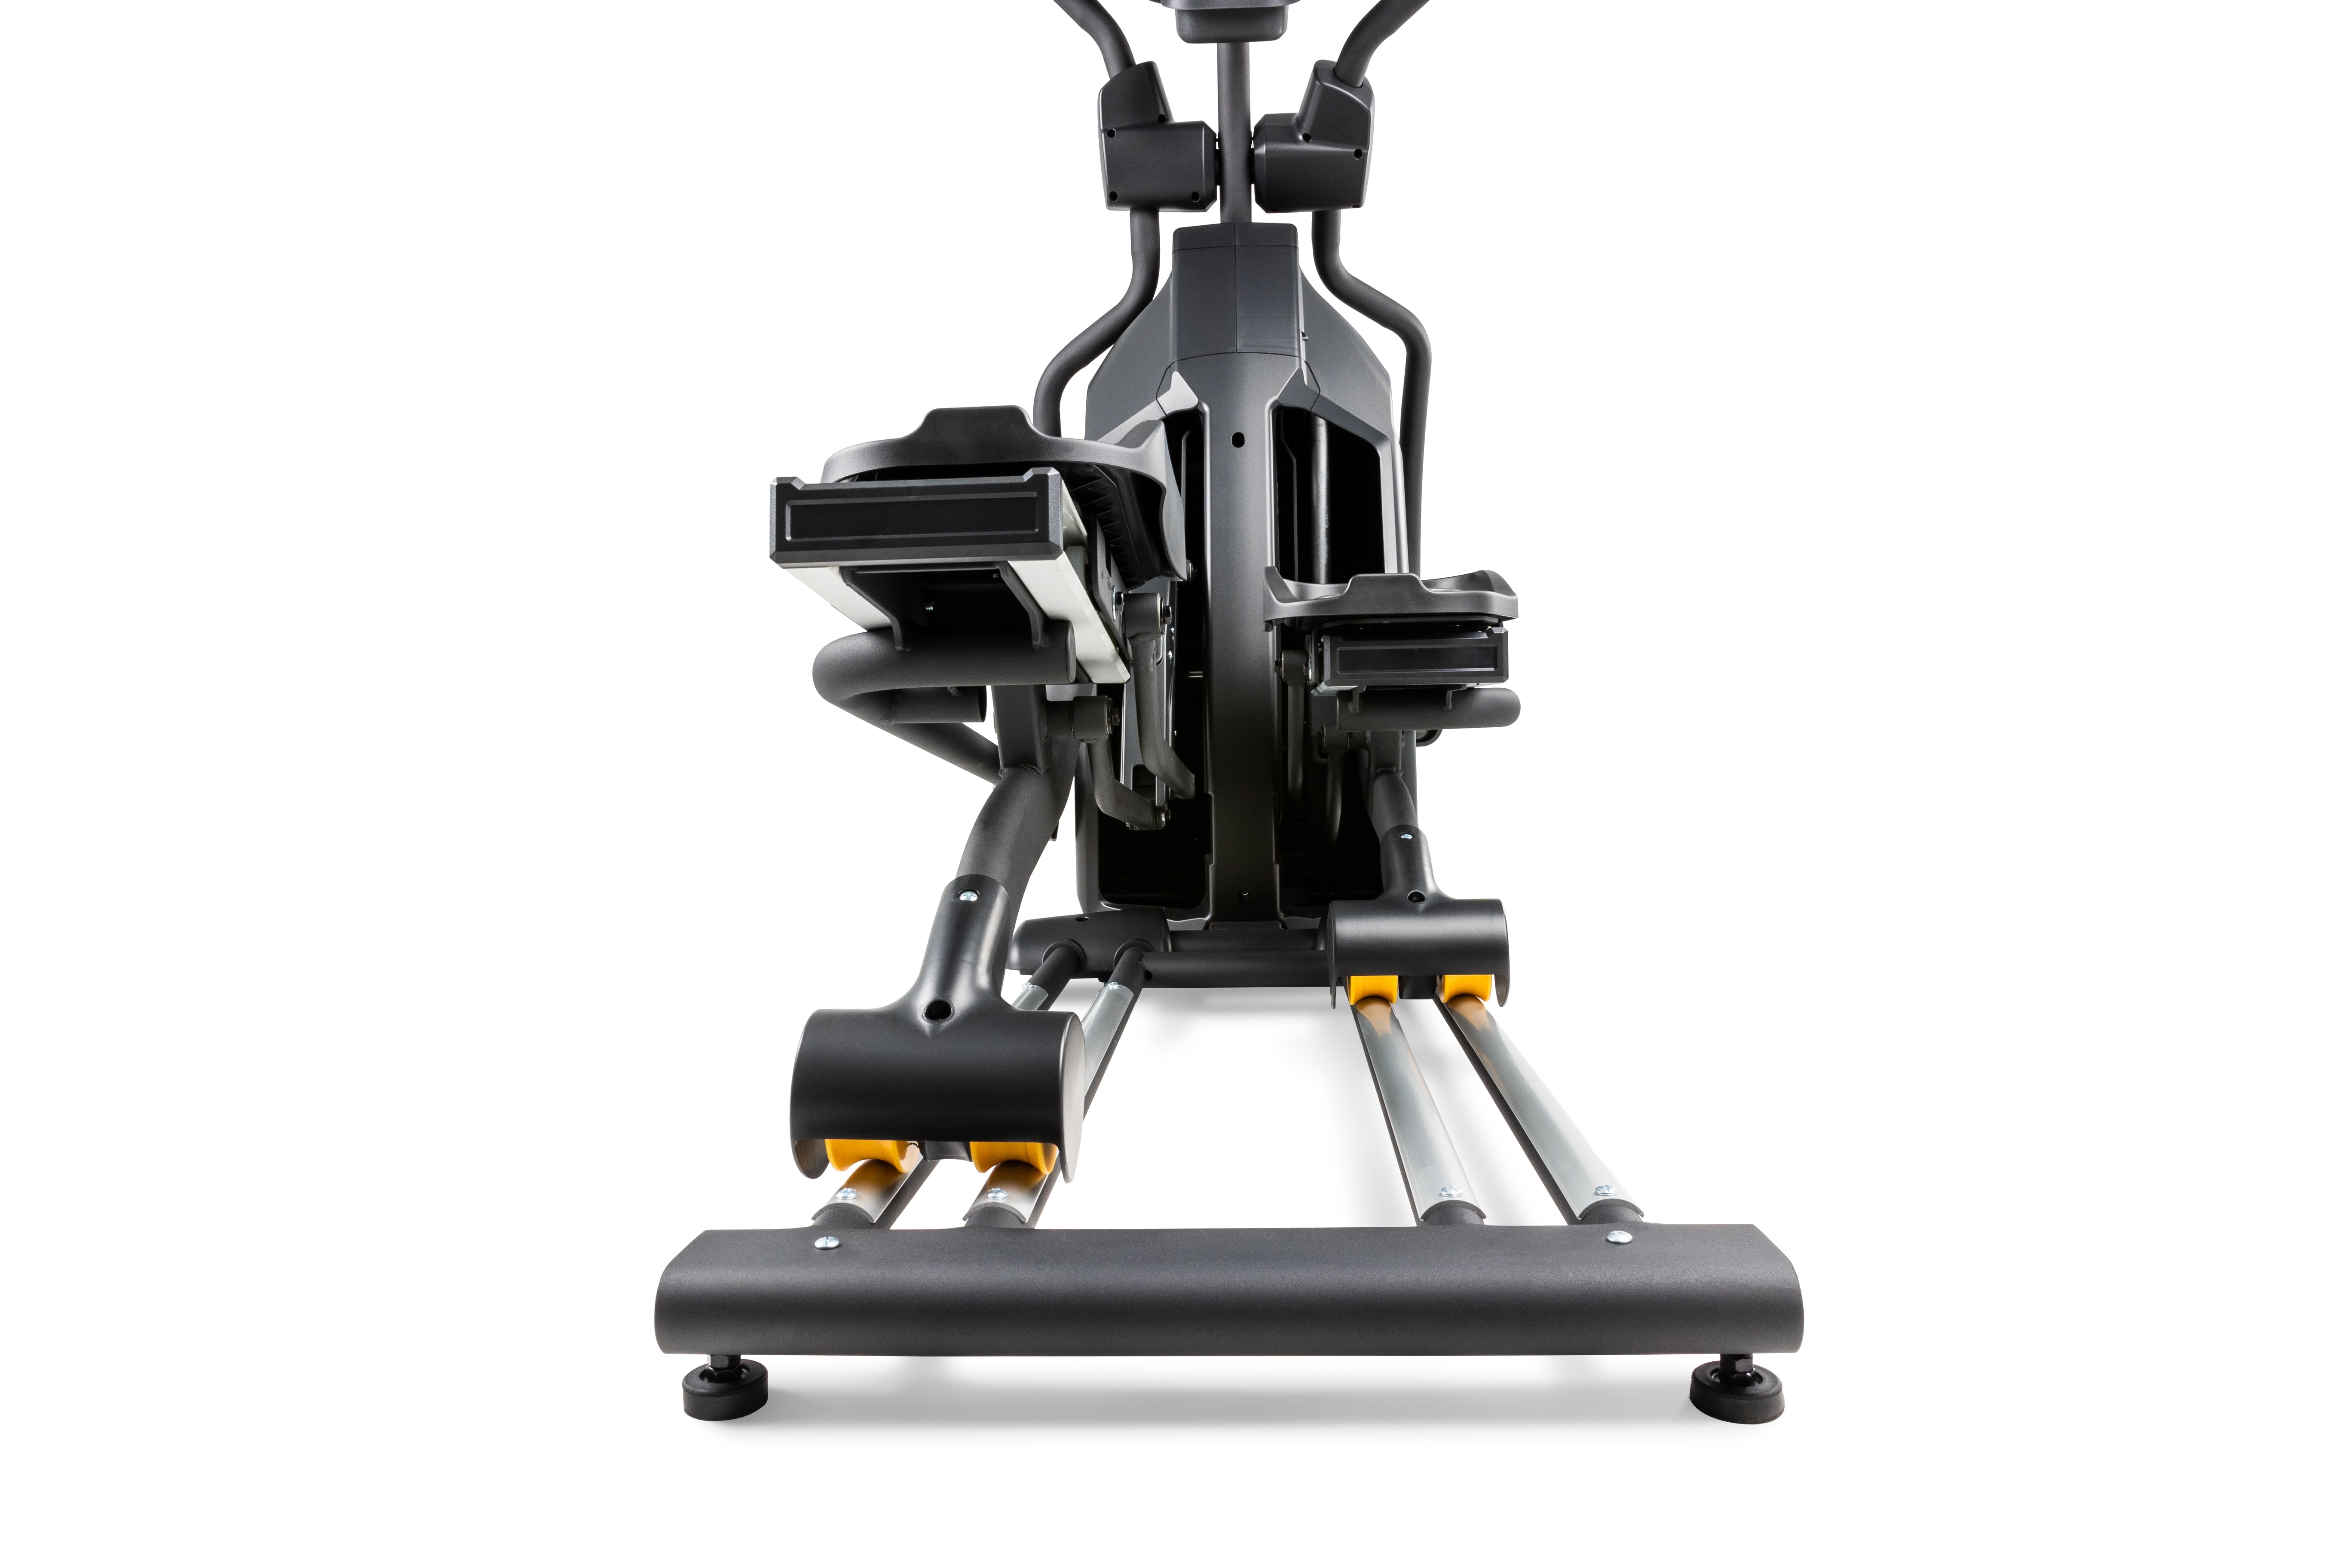 Frontal view of the Sole E95S elliptical machine detailing the foot pedals, handlebars, and central housing structure.